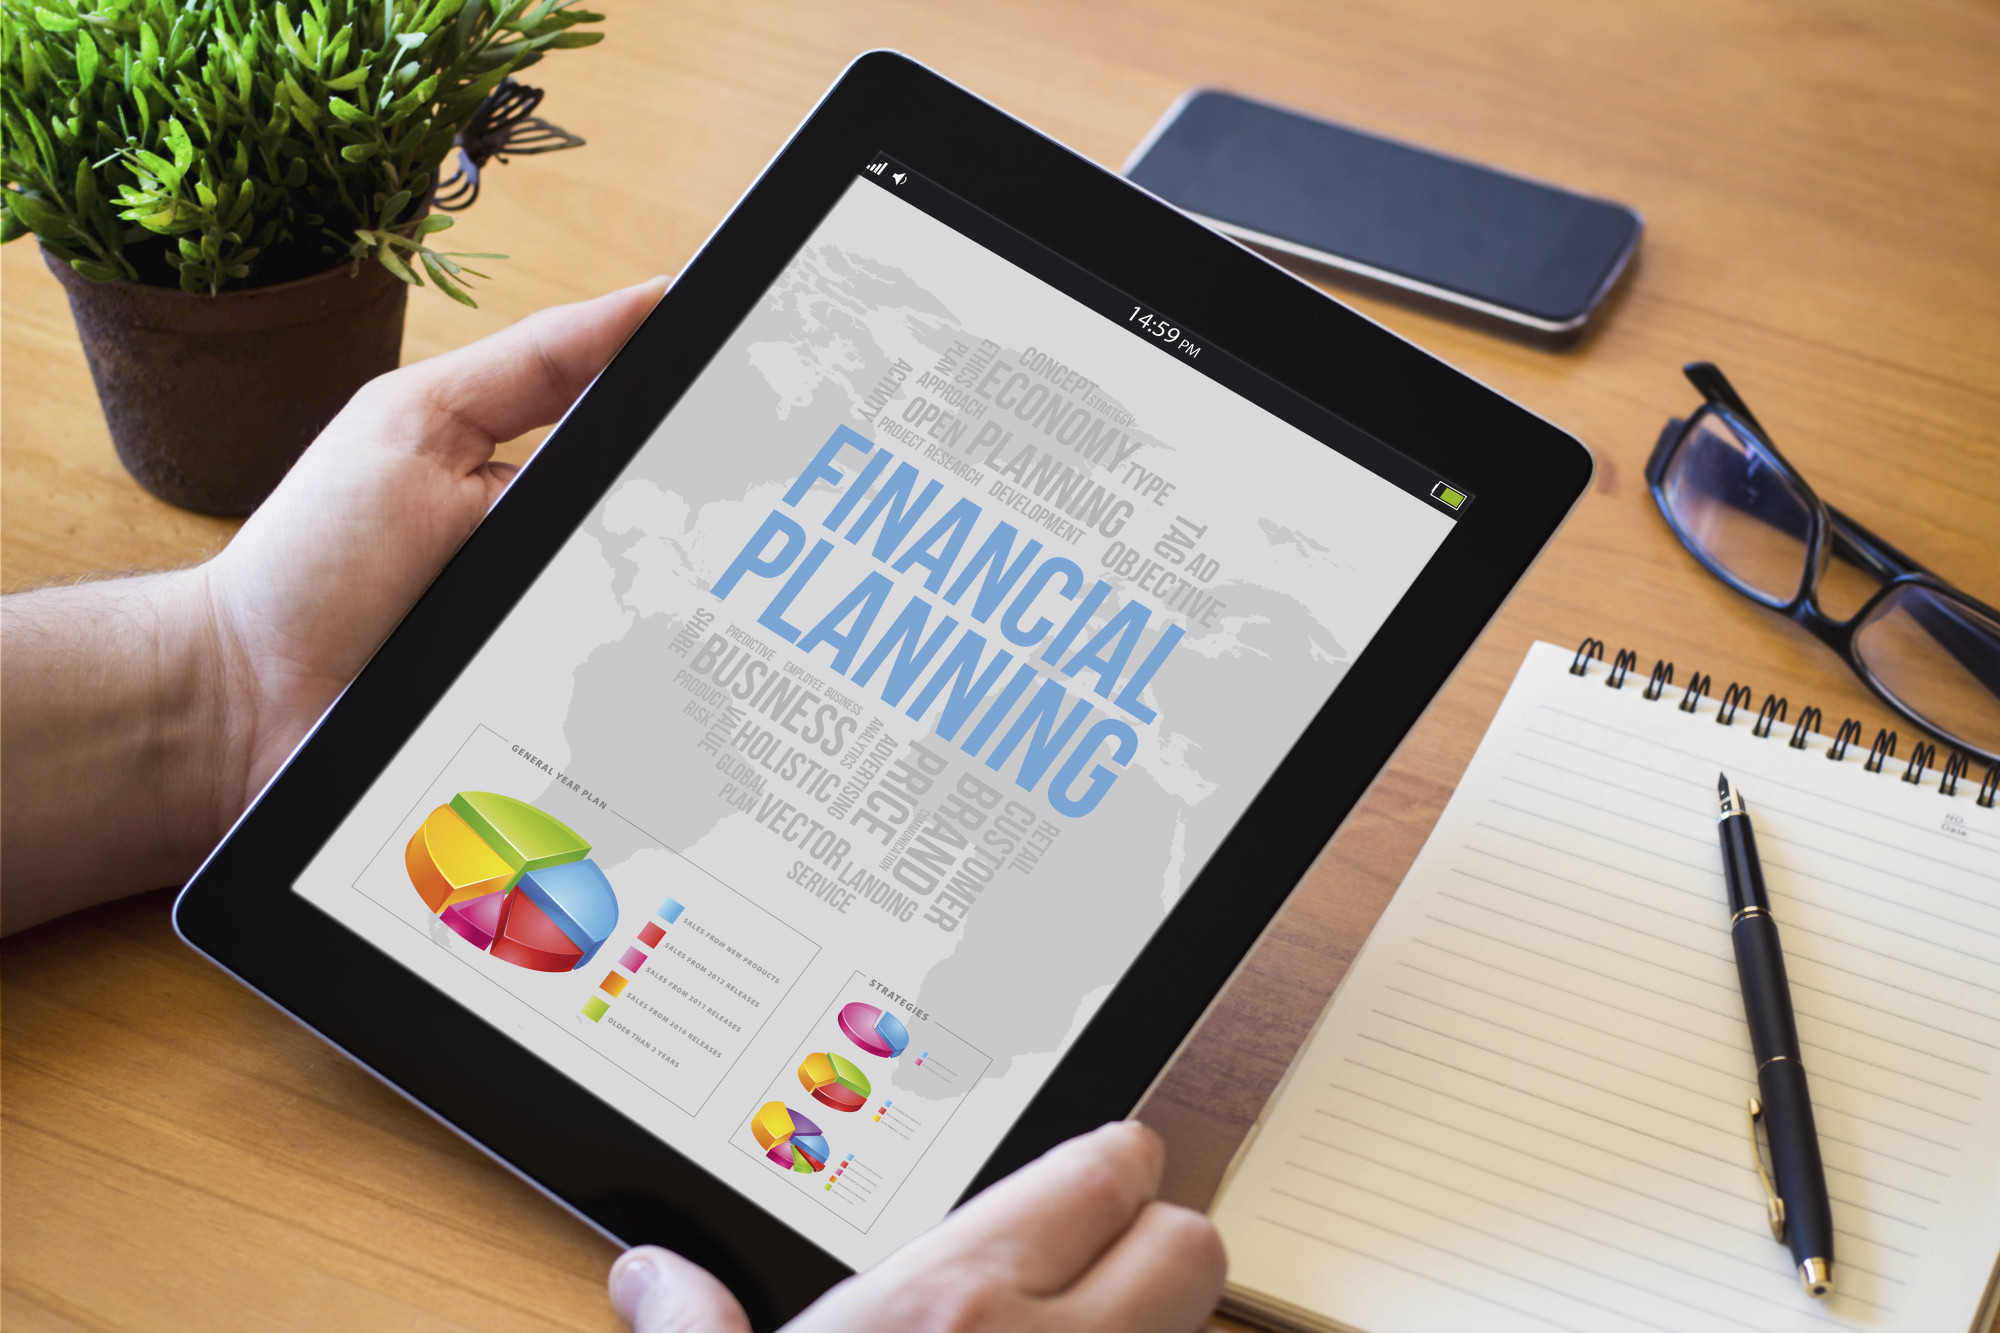 A client explores financial planning options on his tablet